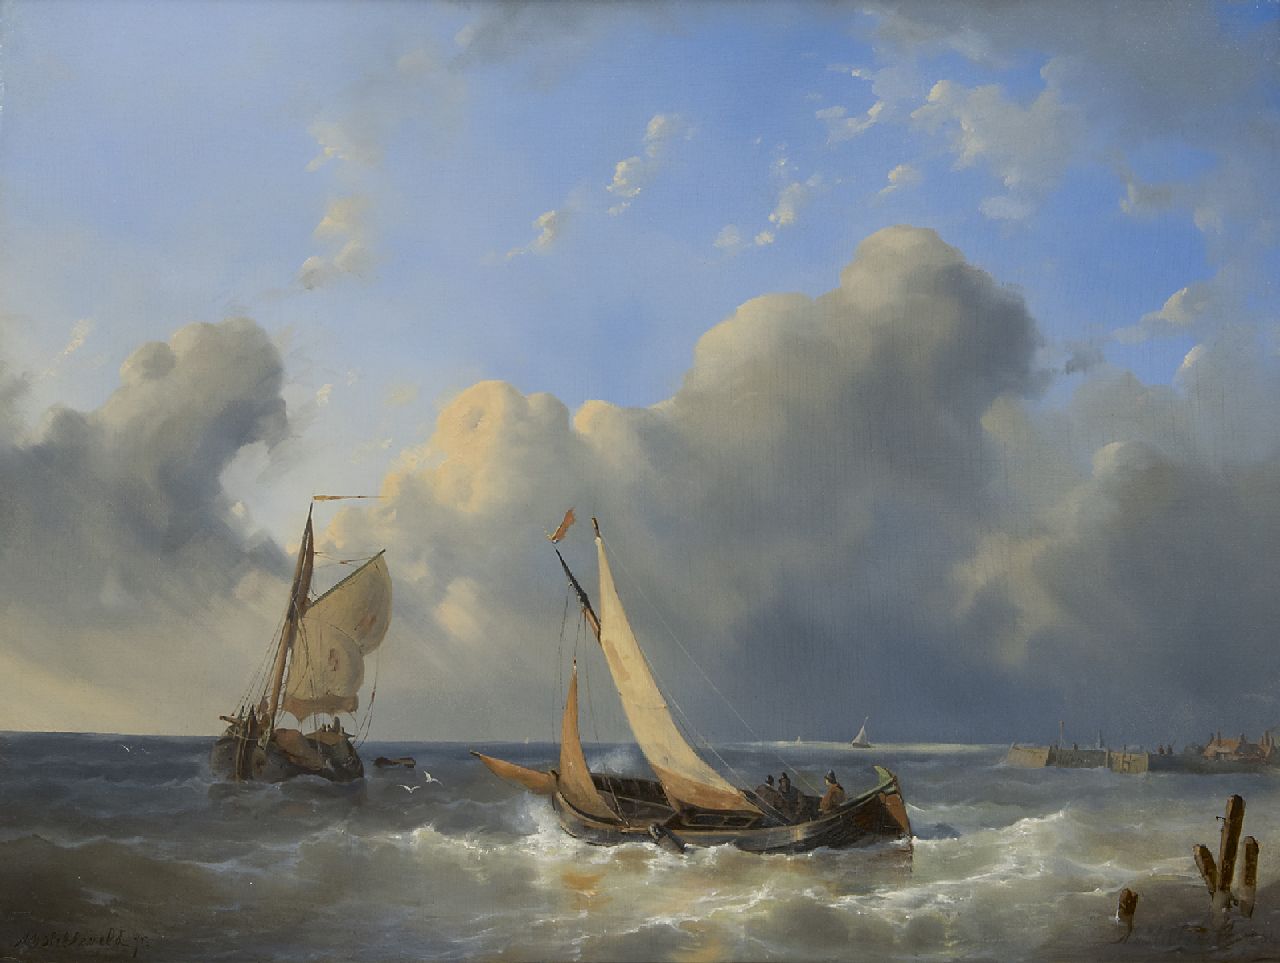 Hilleveld A.D.  | Adrianus David Hilleveld, Sailing vessels near the harbour entrance, oil on panel 42.5 x 56.5 cm, signed l.l. and l.r. and dated '54